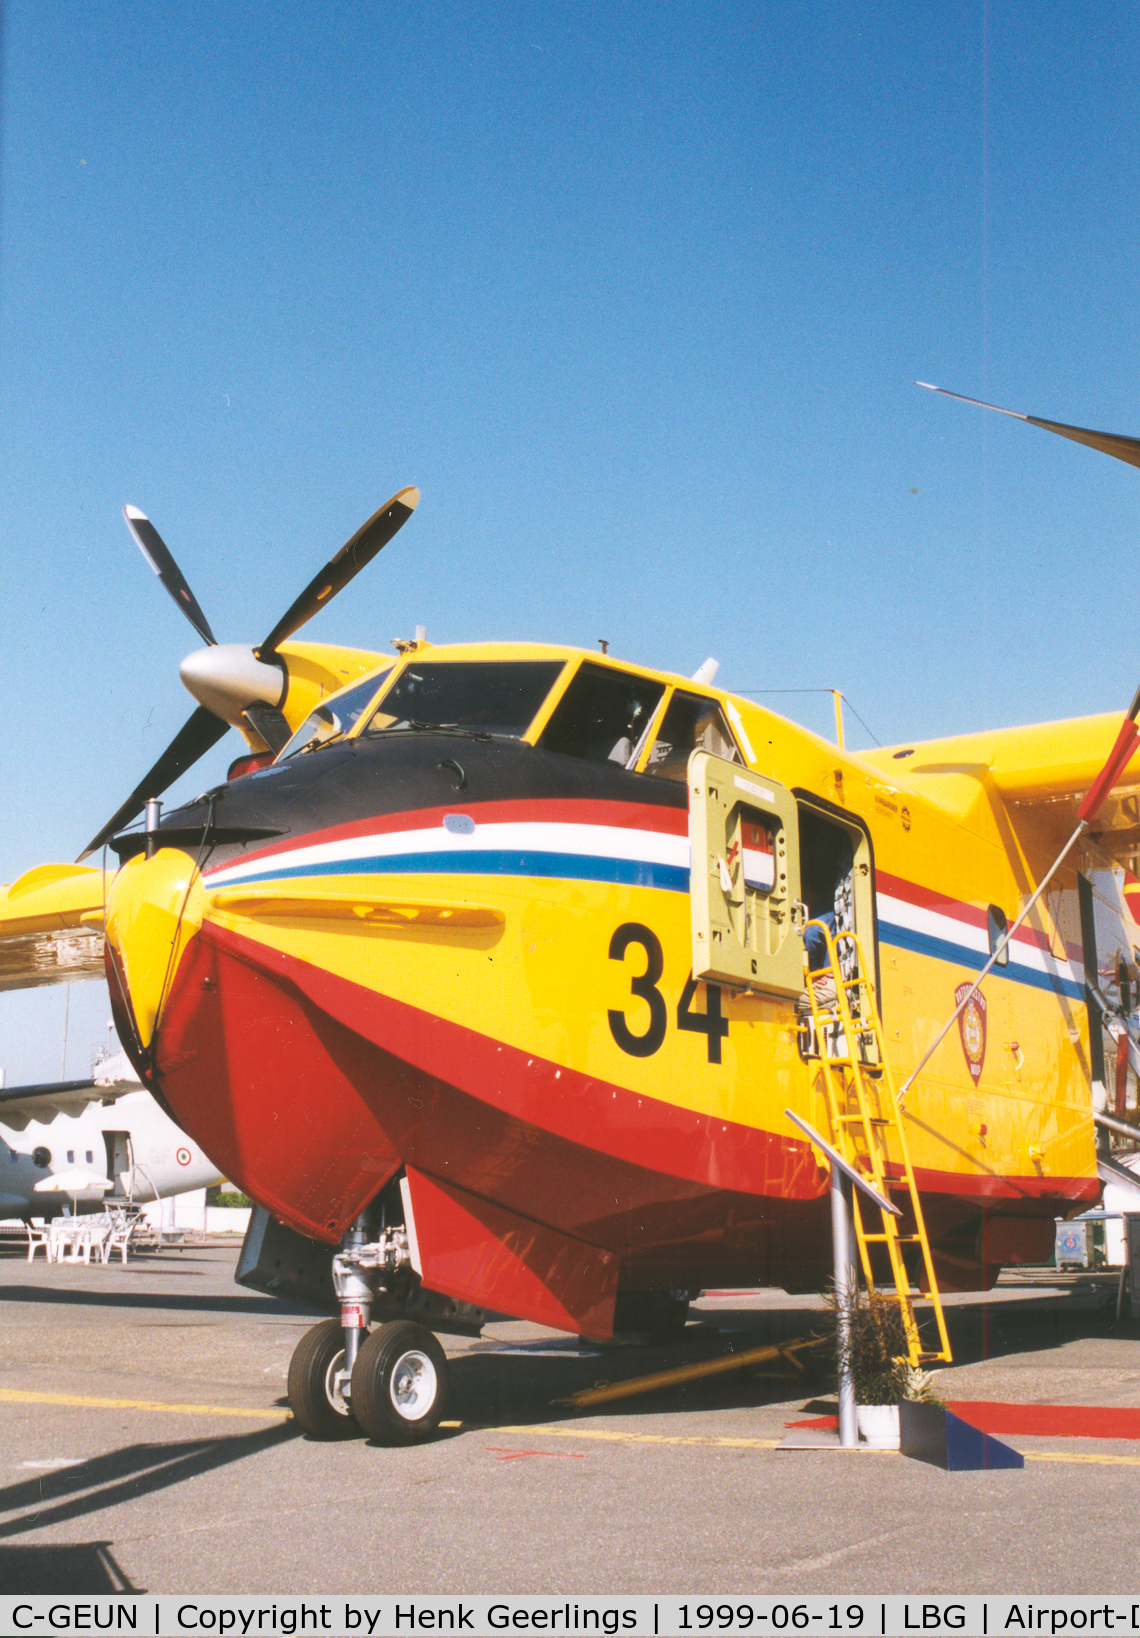 C-GEUN, Canadair CL-215-6B11 CL-415 C/N 2041, Le Bourget Air Show '99

Plane to be delivered to Croatian AF